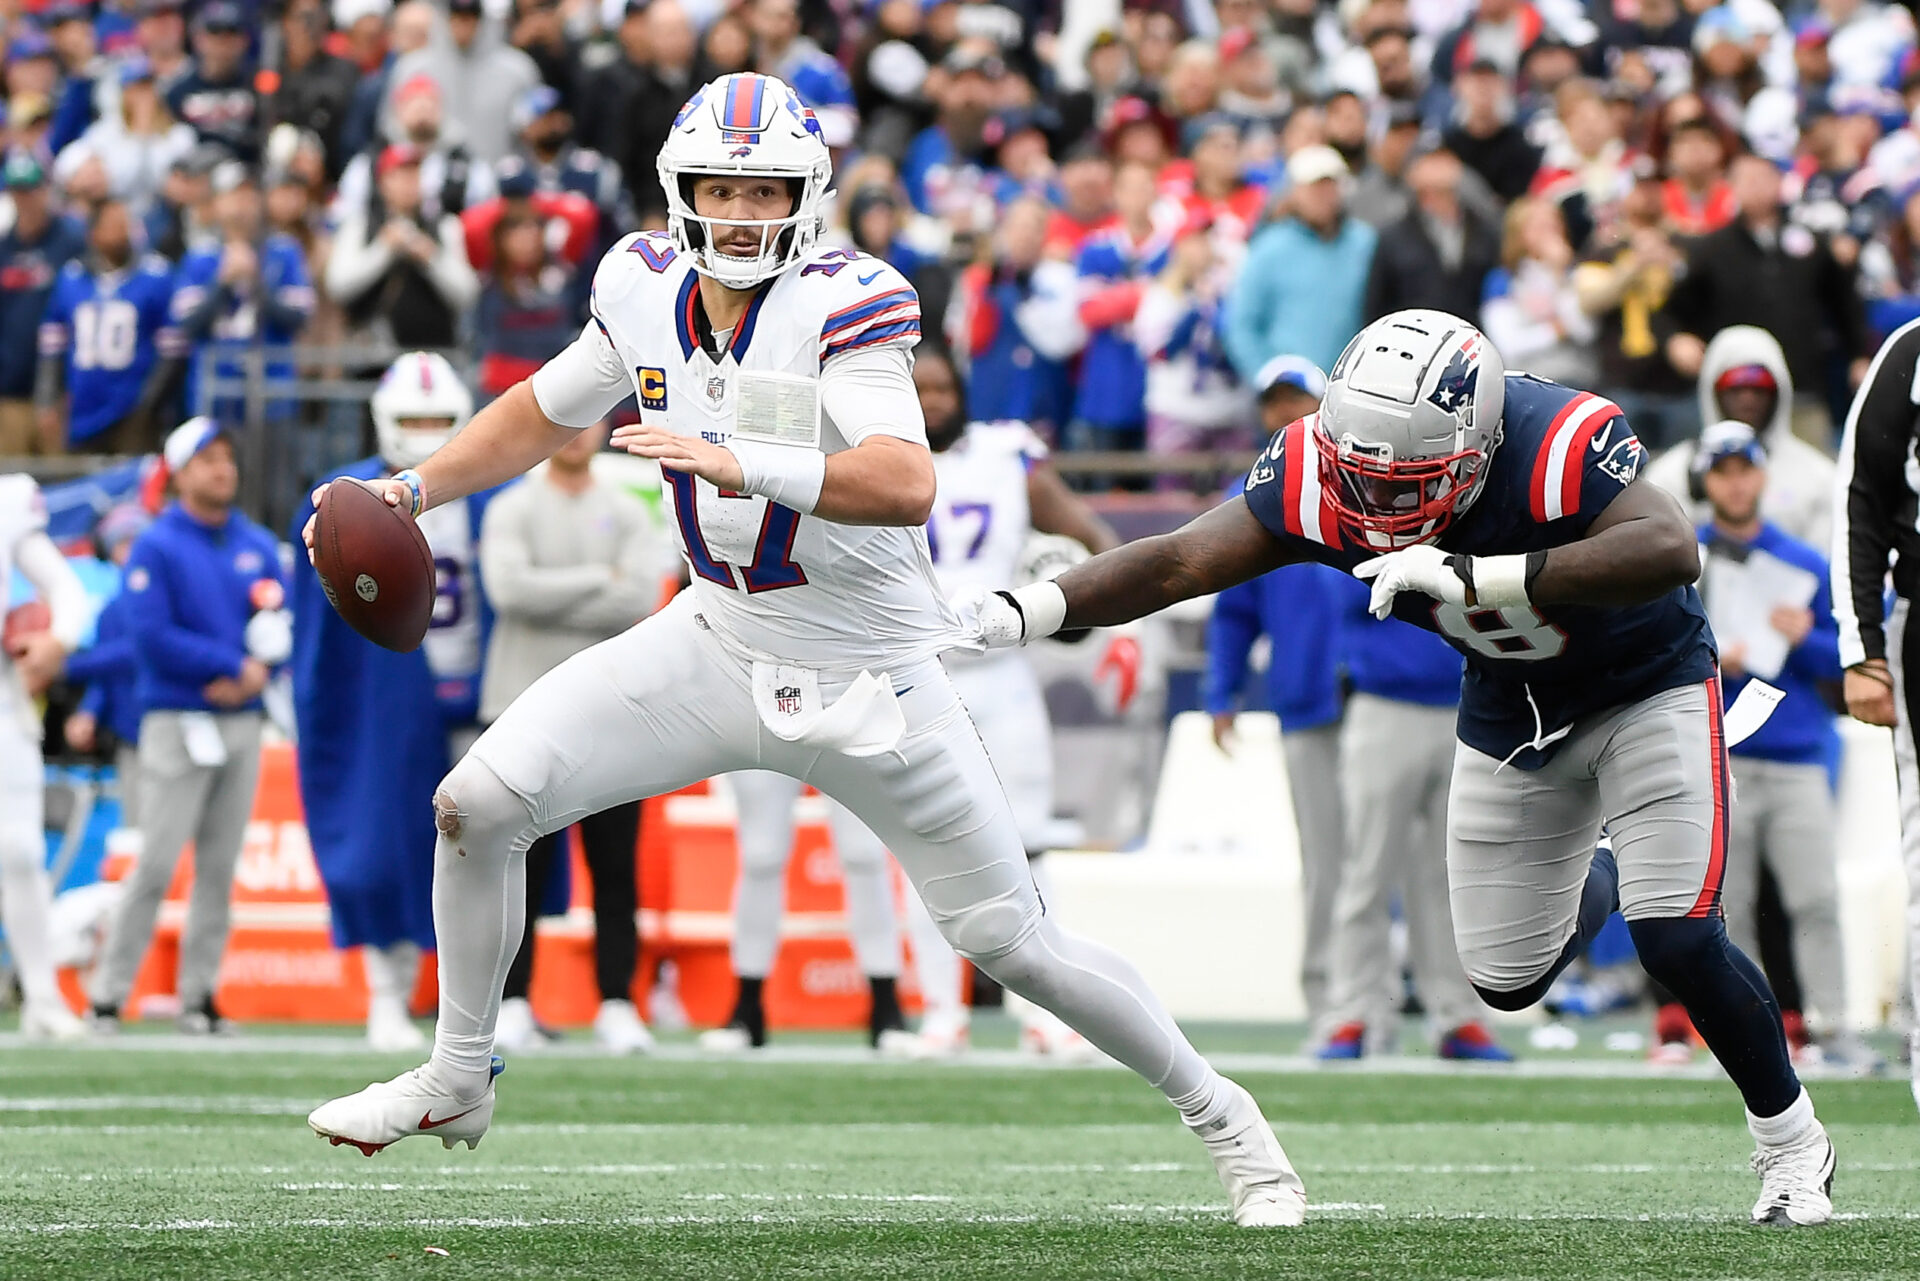 Josh Allen escapes the outstretched arms of a Patriots defender